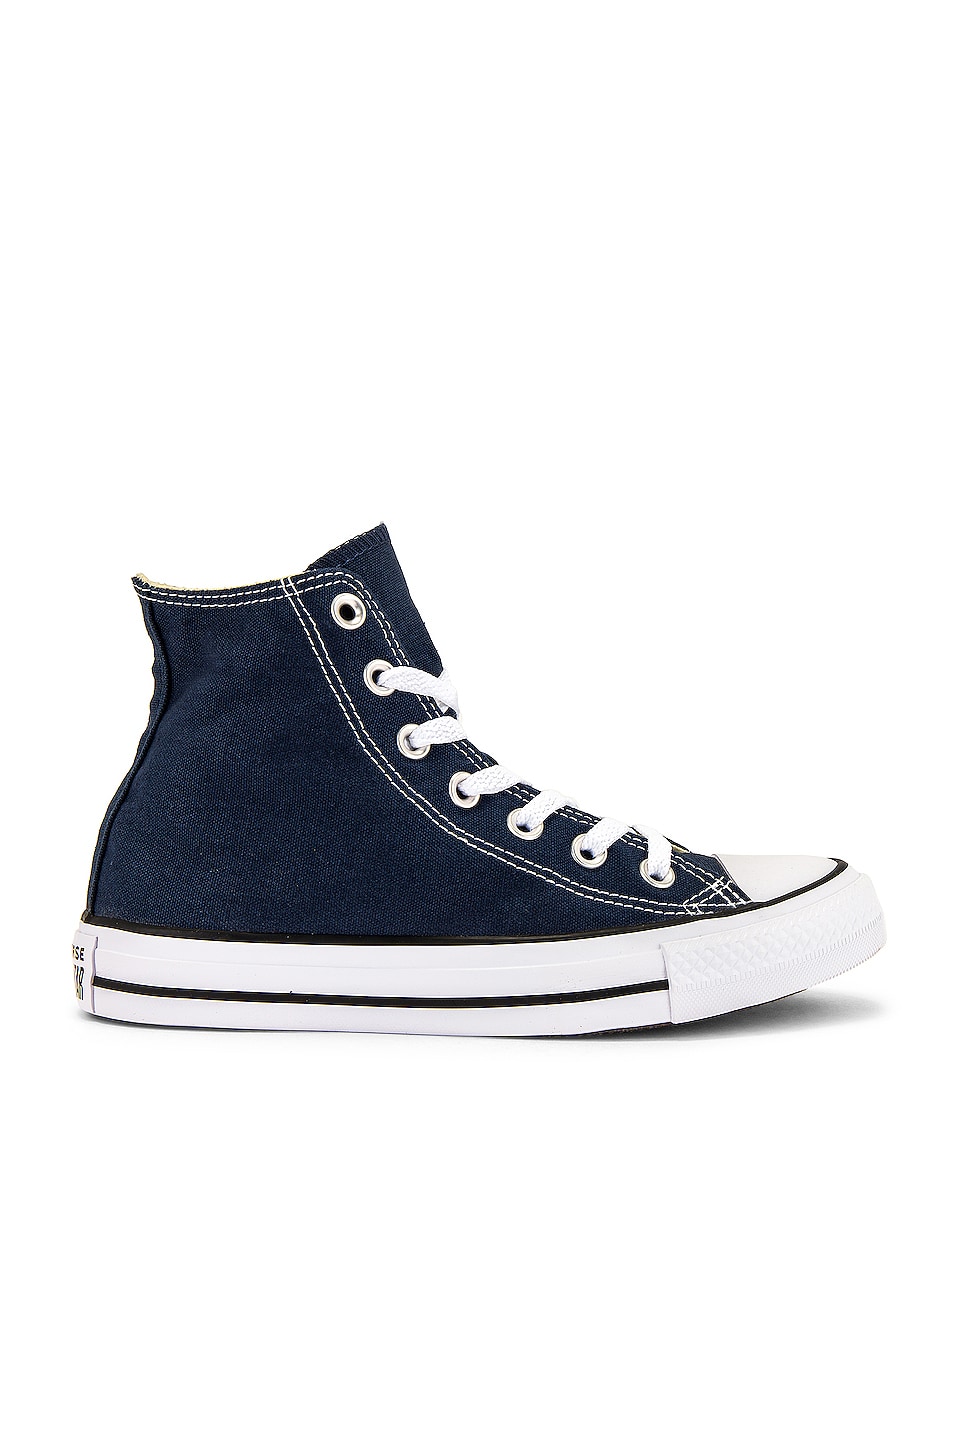 Converse Chuck Taylor All Star Hi Sneaker in Navy - Size M5.5 / W7.5